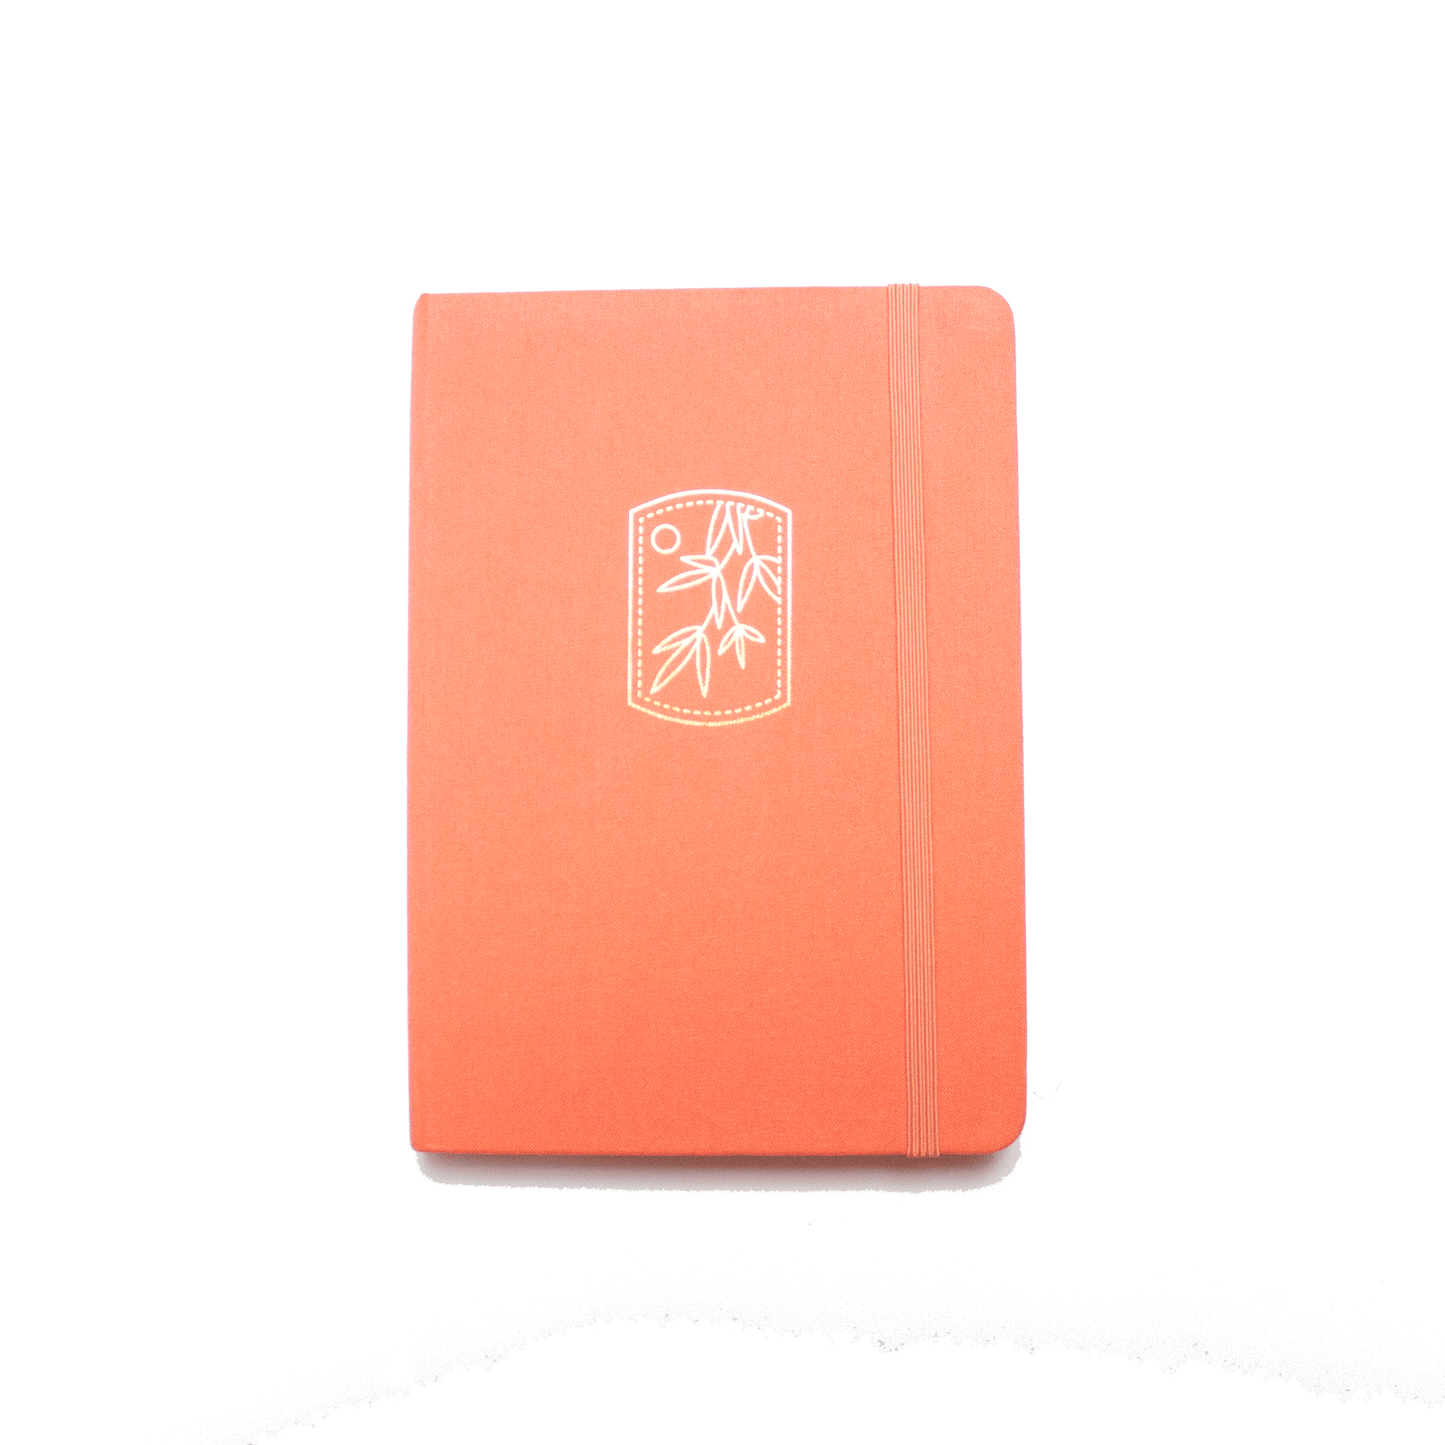 The A5 bobo BuJo Dot Grid Journal in "Tangerine" orange. A gold foil illustration of mandarin tree leaves and a sun is stamped on the front cover. A matching orange elastic closure is holding the journal closed.